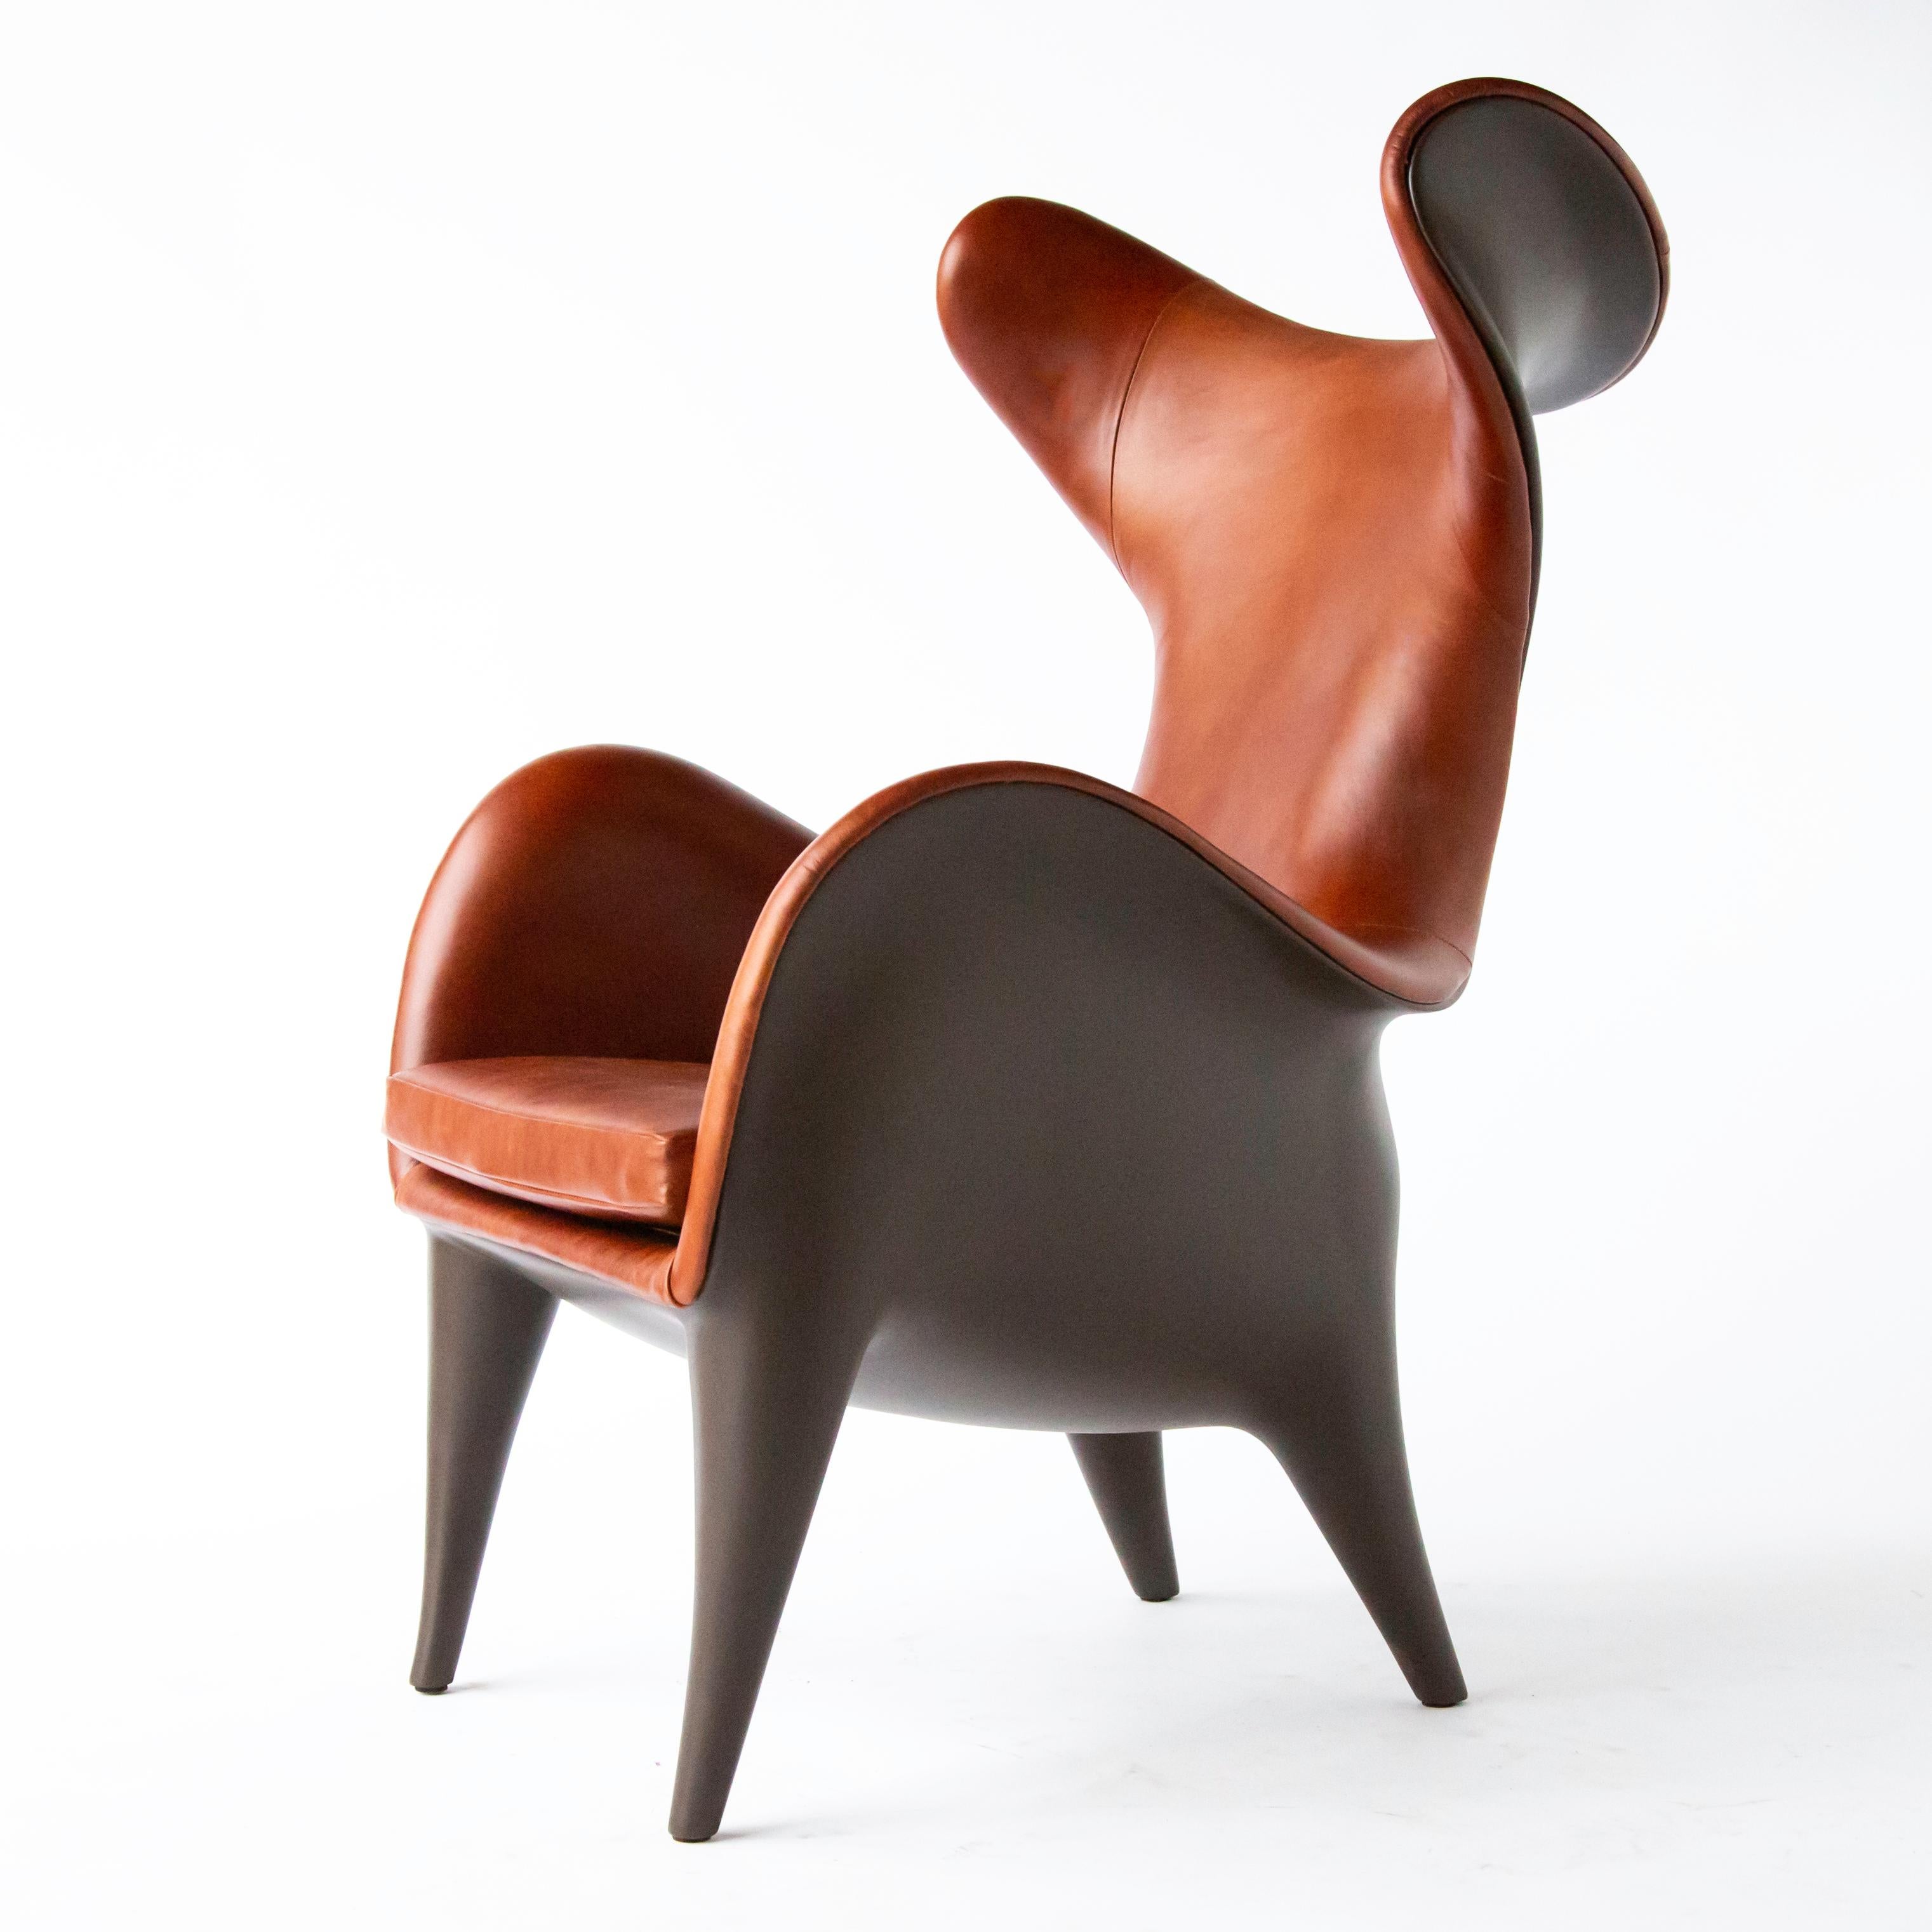 New Johnny wingback chair or lounge chair, deep Bourbon leather and chocolate resin, made in Chicago. Jordan Mozer (b. 1958). 

Frankie and Johnny lounge chairs were created for Hotel 57 in New York in 2007. This version was created in 2019.